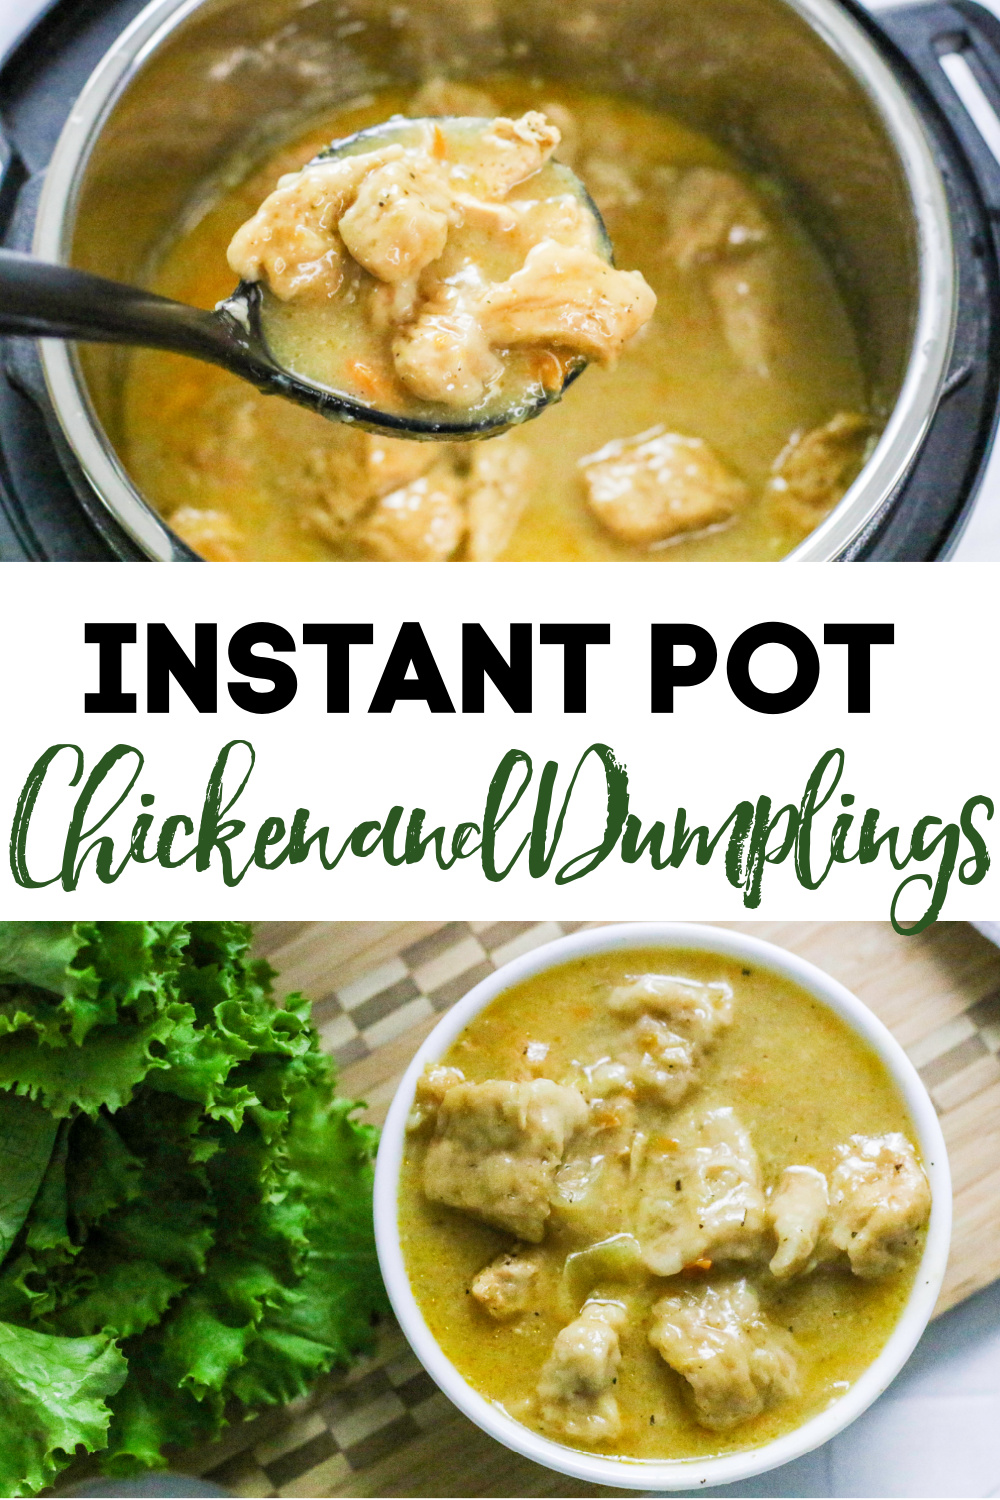 Instant Pot Chicken and Dumplings made in the pressure cooker is one of our favorite hearty, down-home recipes. Made with chicken, seasonings, veggies, and more.